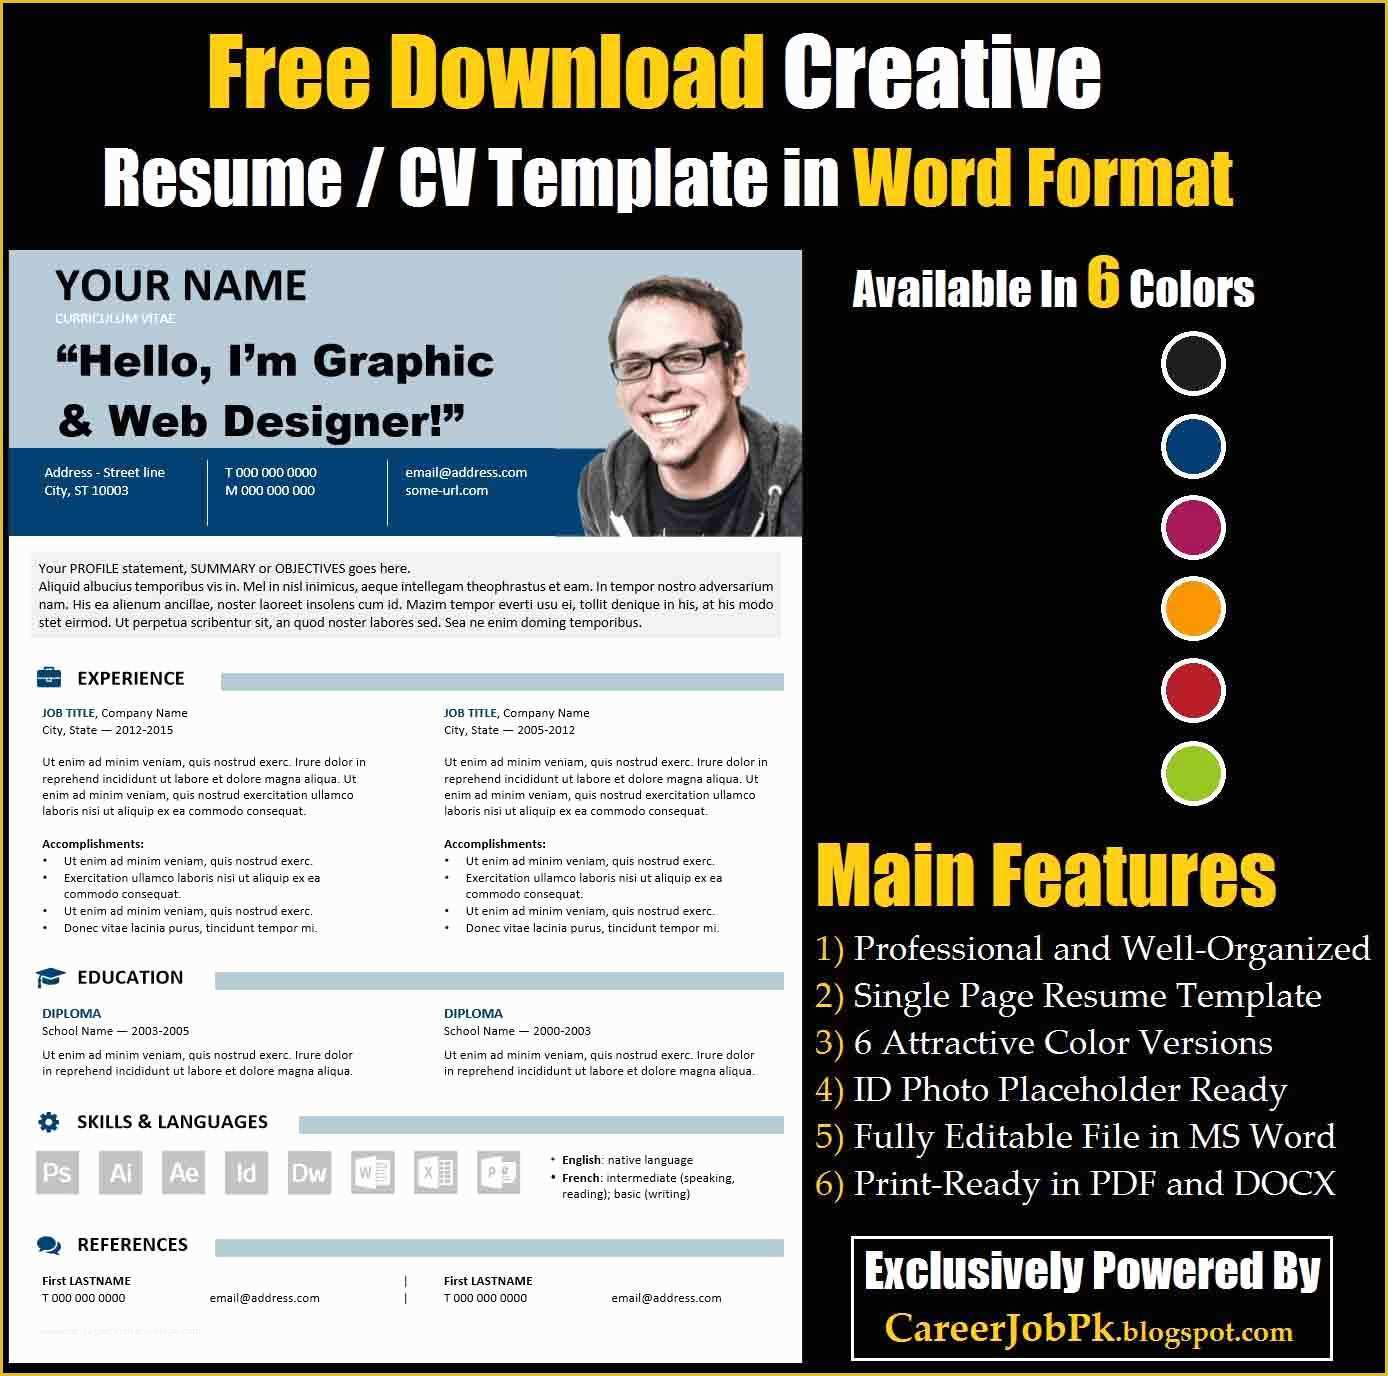 Creative Resume Templates Free Download for Microsoft Word Of Free Download Editable Resume Cv Template In Ms Word format